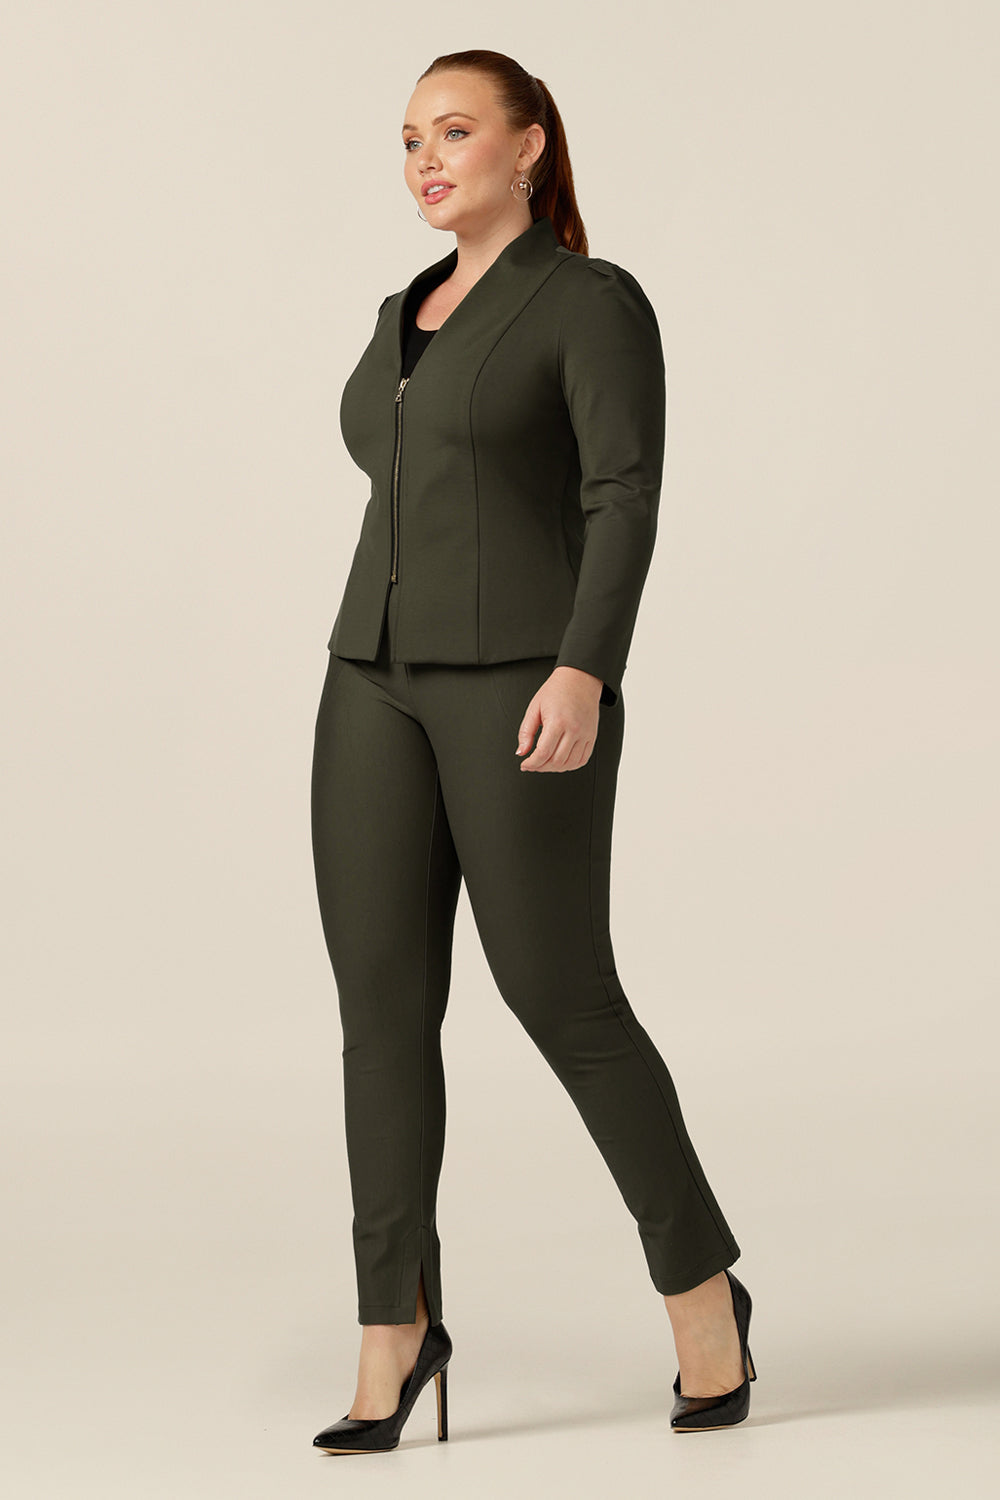 a size 12 curvy woman wears a tailored jacket with long sleeves, collarless V-neckline and zip fastening. Made in Australia in olive green ponte jersey, this is a quality-made, comfortable jacket is style with lim leg pants in olive green to create a soft suiting look for work and corporate wear.  